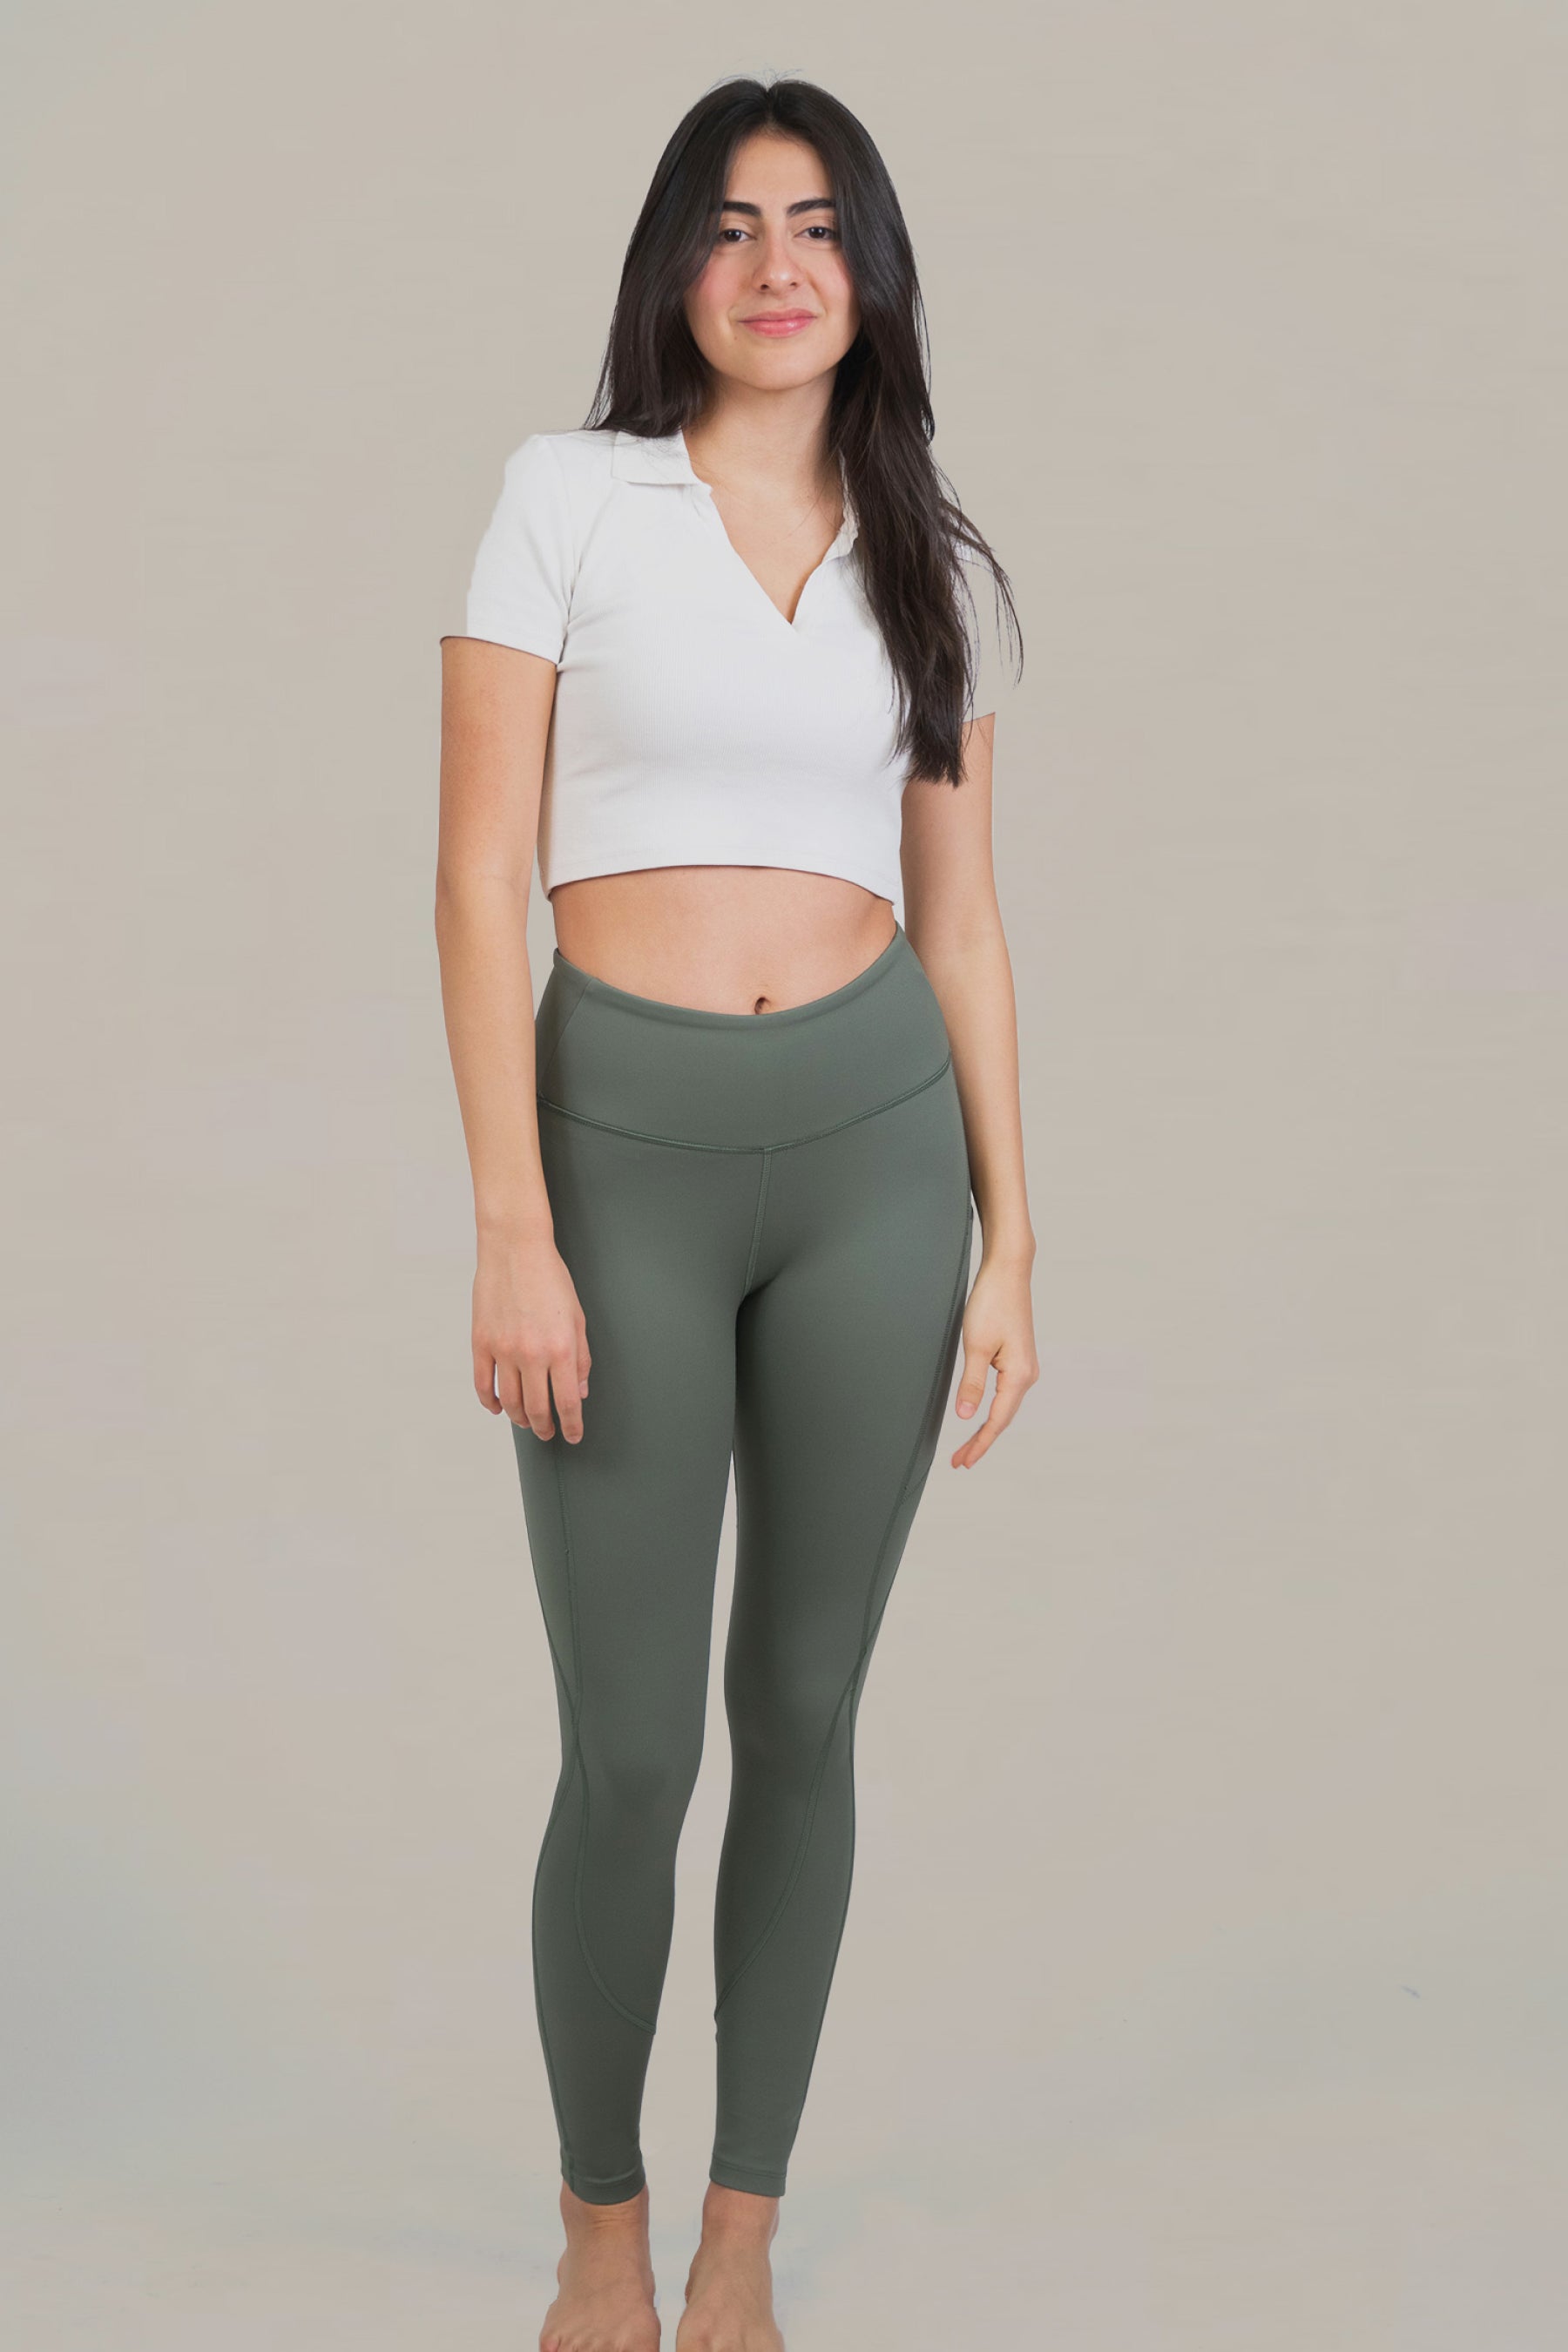 New complaints on Lululemon website about yoga pants pilling, too sheer